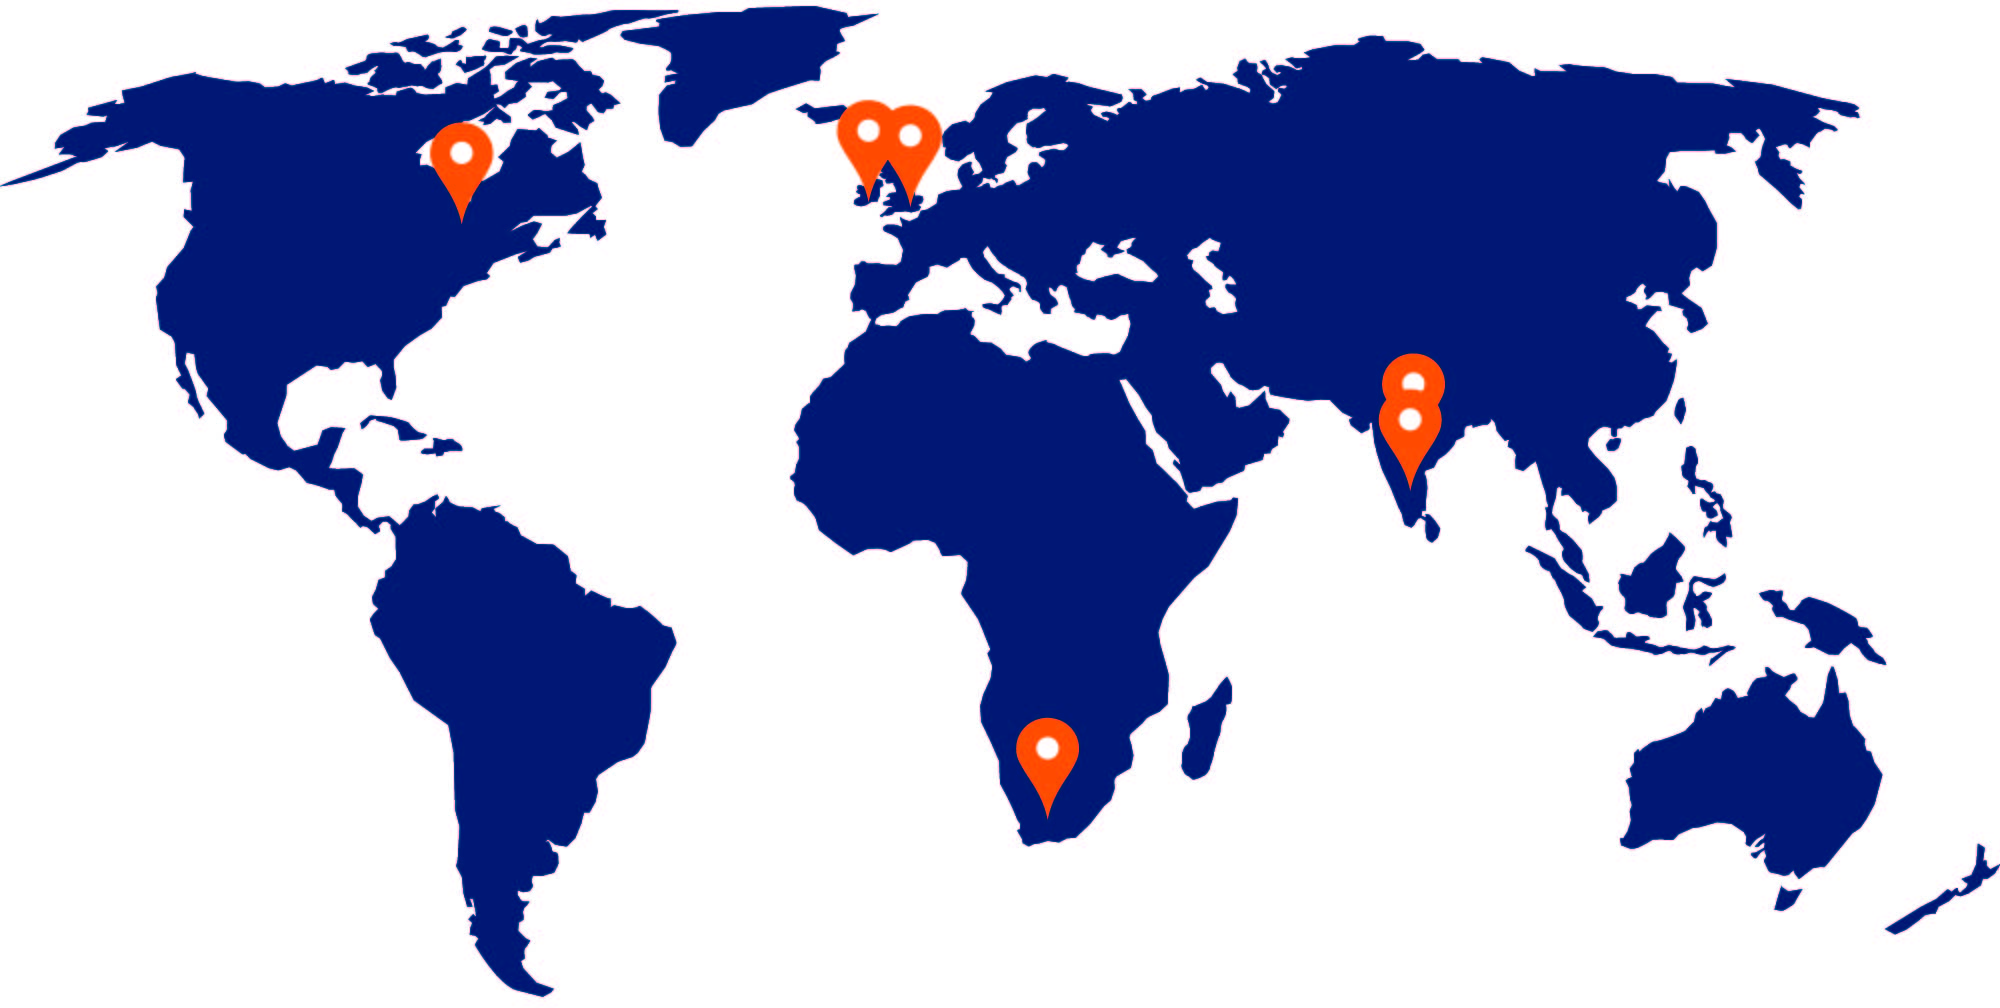 MMS Headquarters and Global Locations